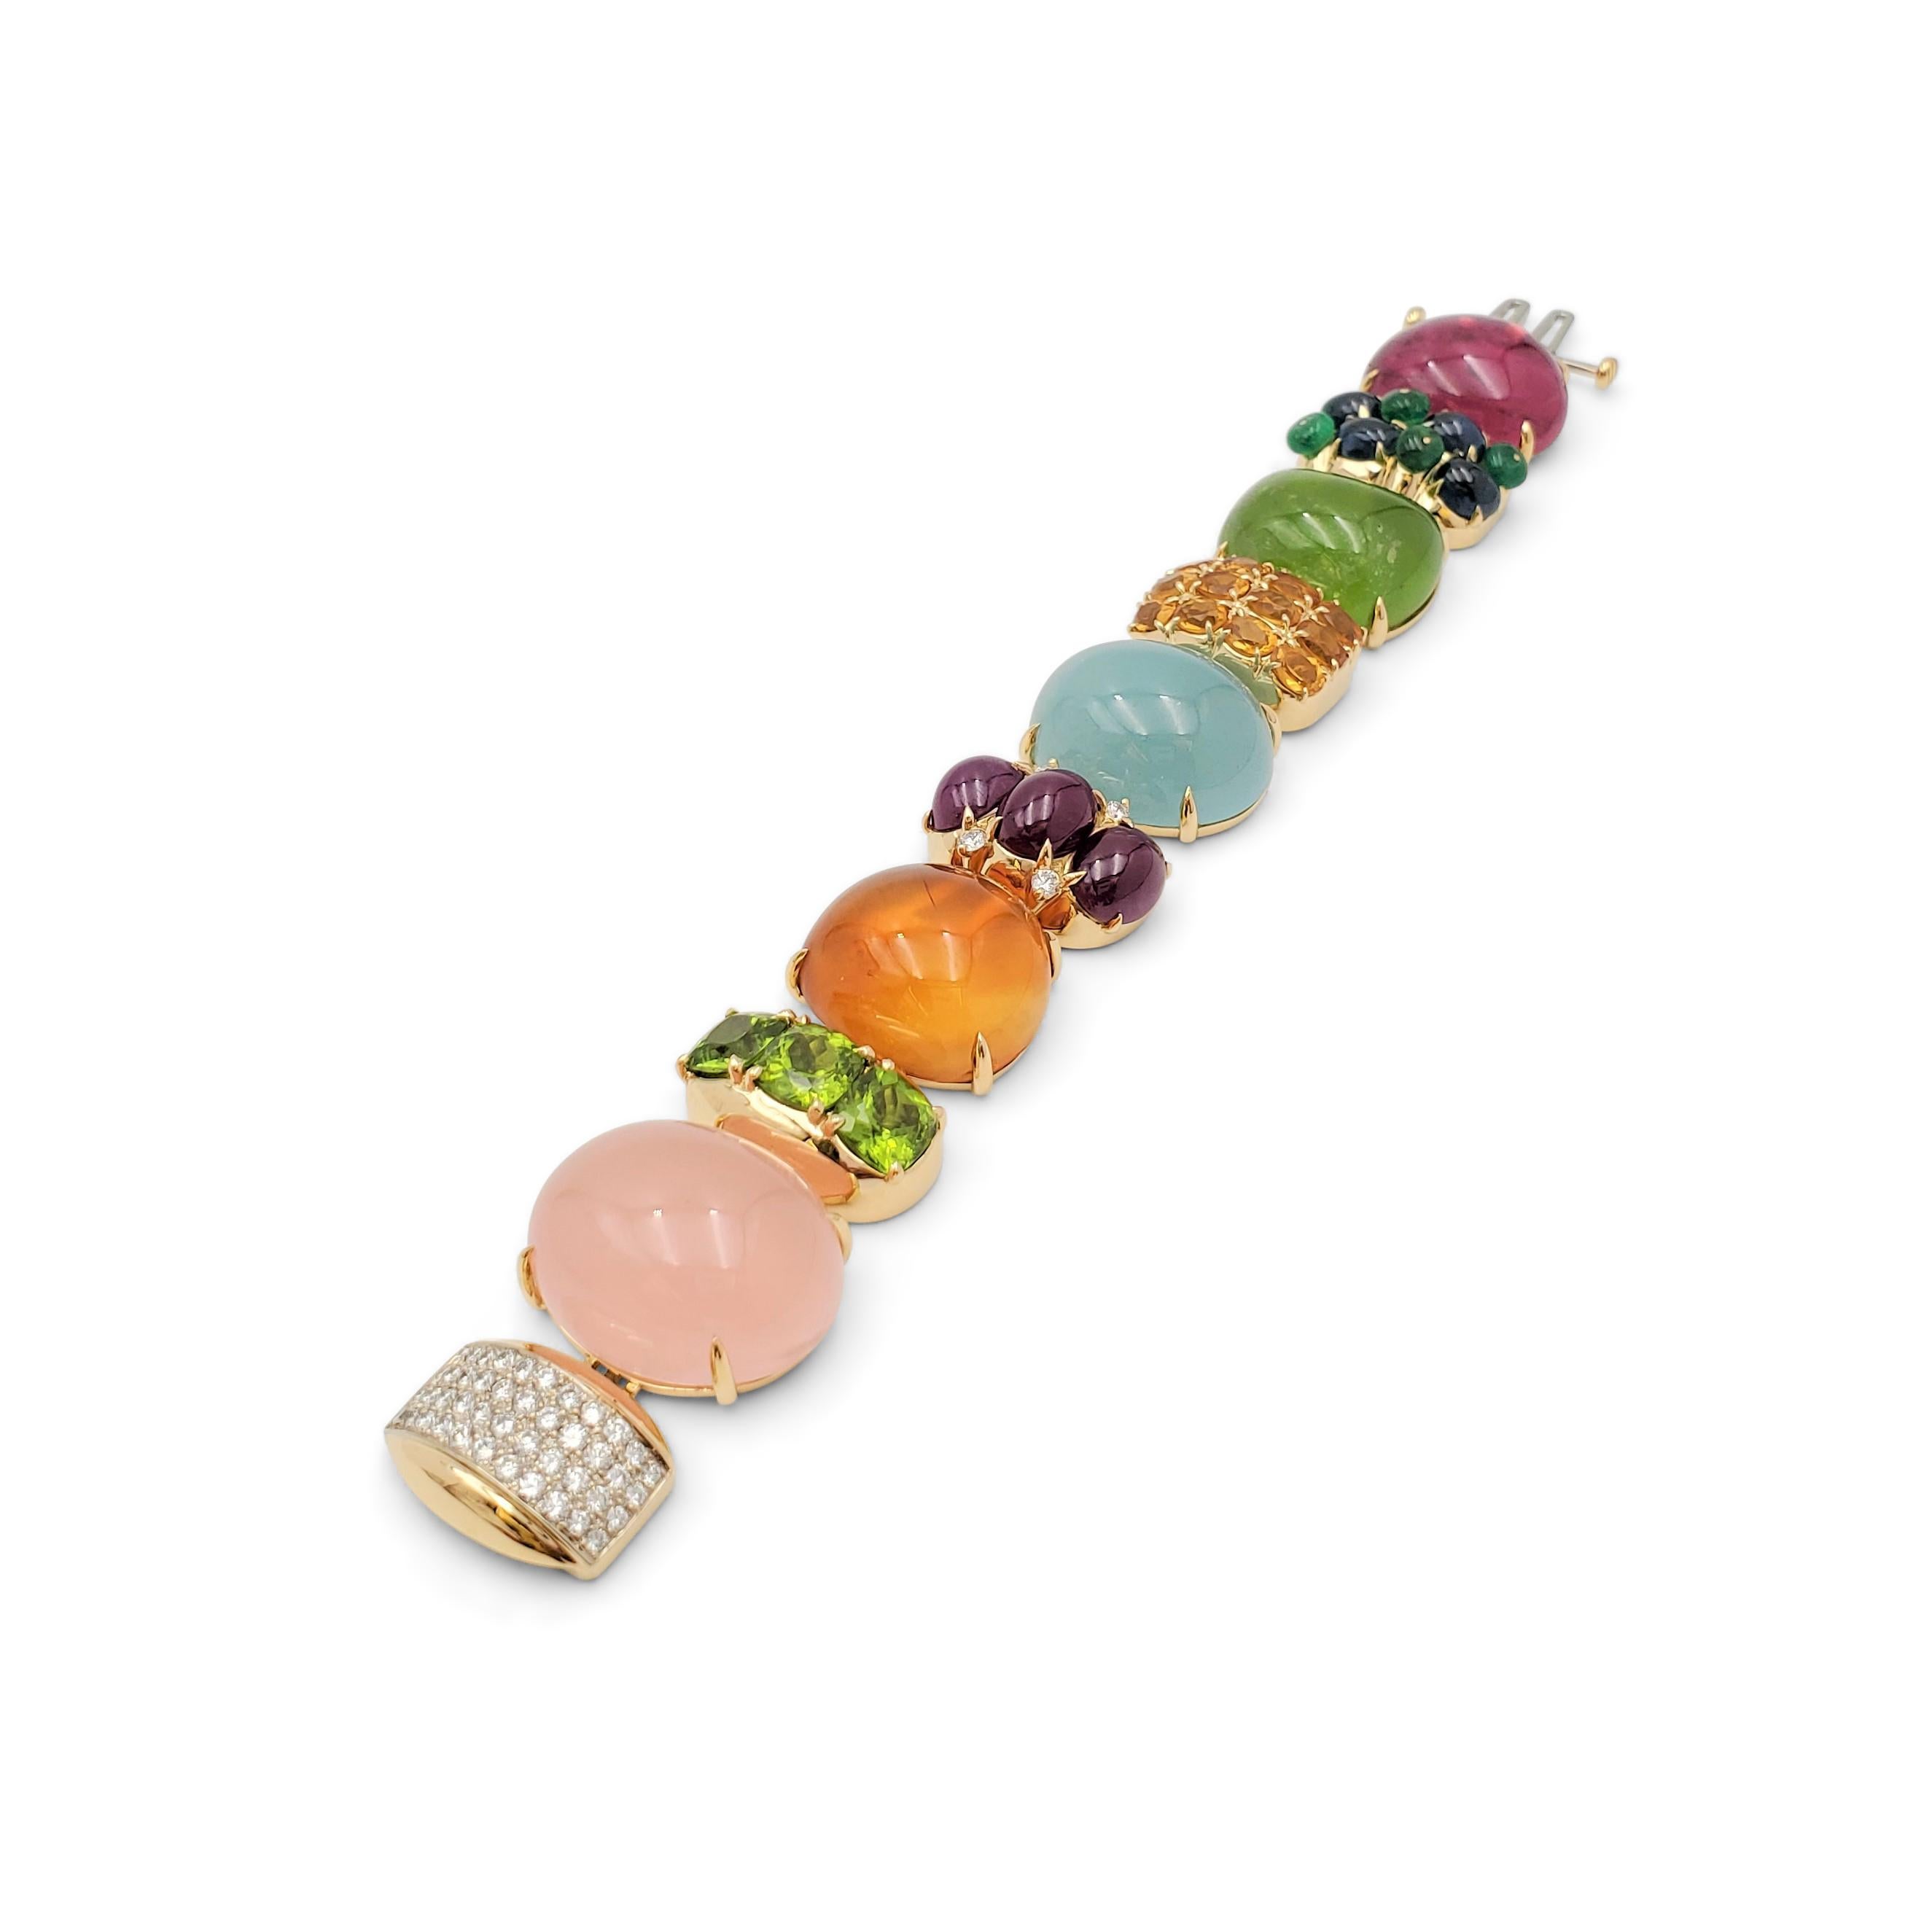 Authentic playful Seaman Schepps bracelet from the Rio collection. Crafted in 18 karat yellow gold, the bracelet is comprised of ten links set with five large tourmaline, peridot, chalcedony, citrine, and rose quartz cabochons, separated by blue